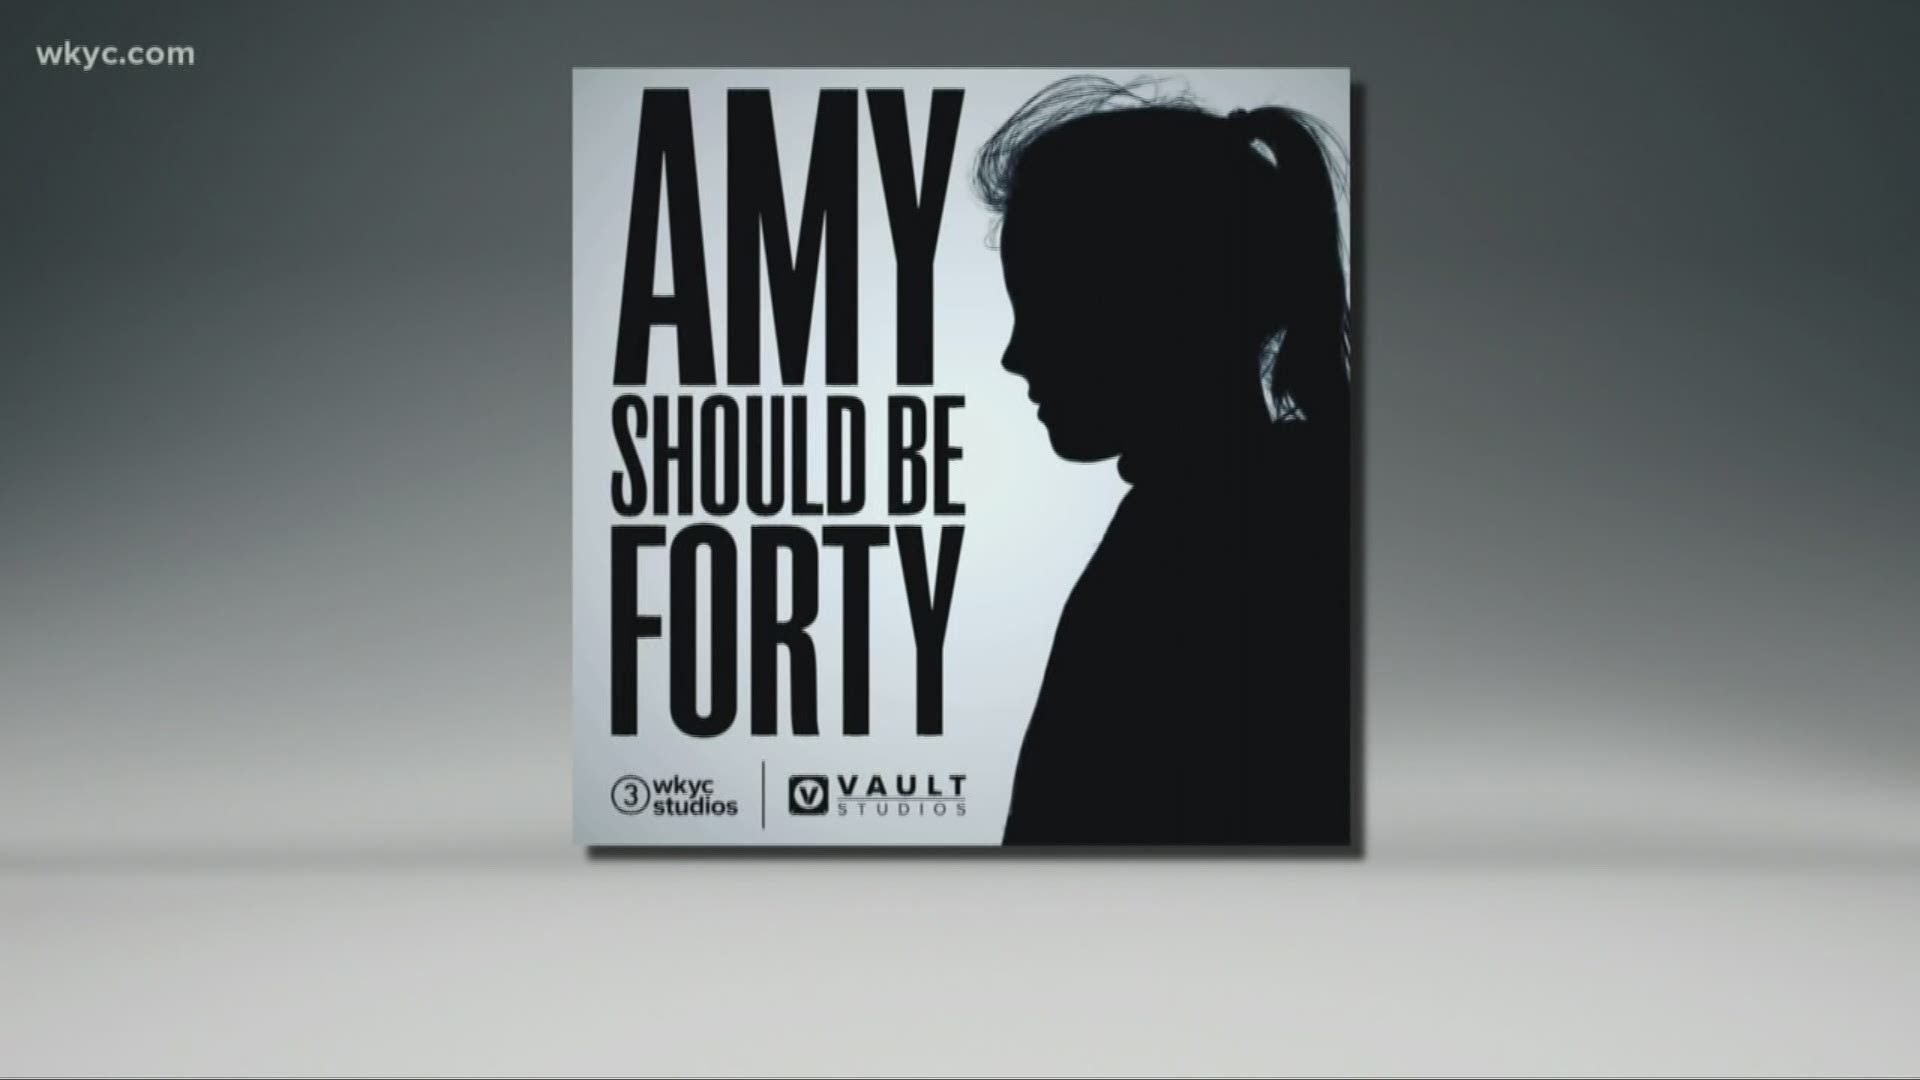 Did you ever lose a friend growing up? Wonder what their life might look like if they had not died? Check out the 'Amy Should Be Forty' podcast.